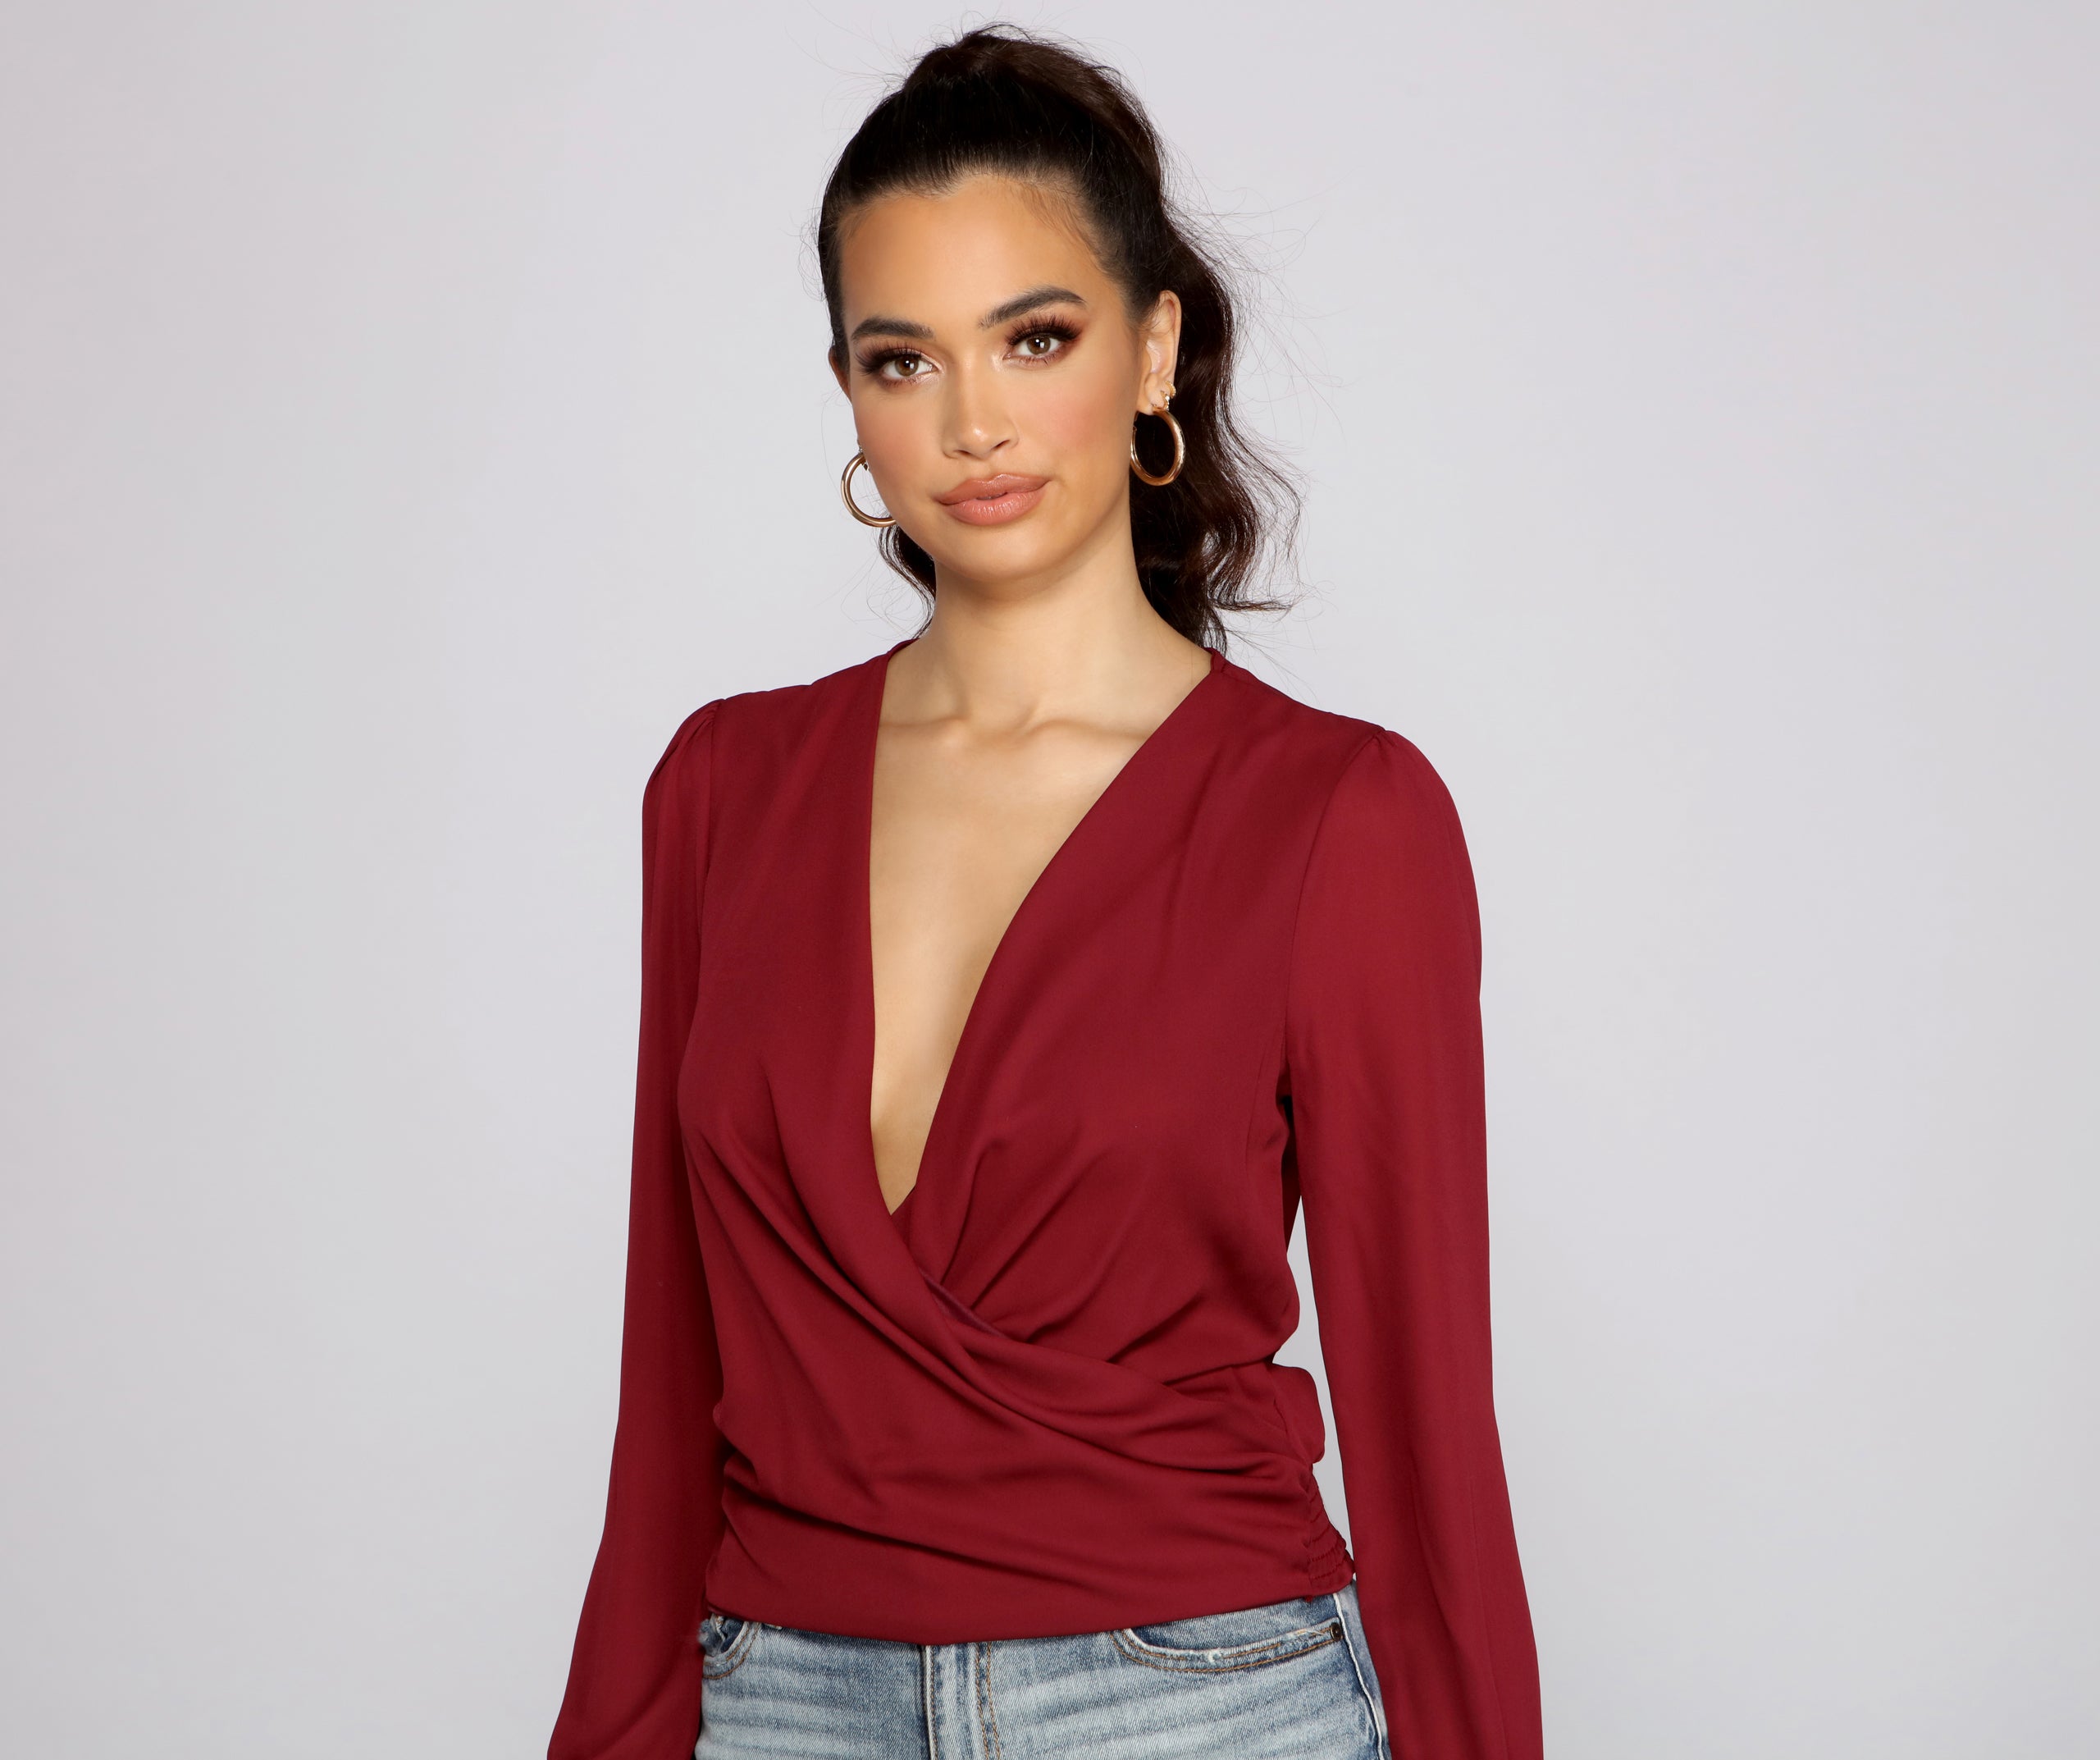 Moment of Luxe Chiffon Surplice Top